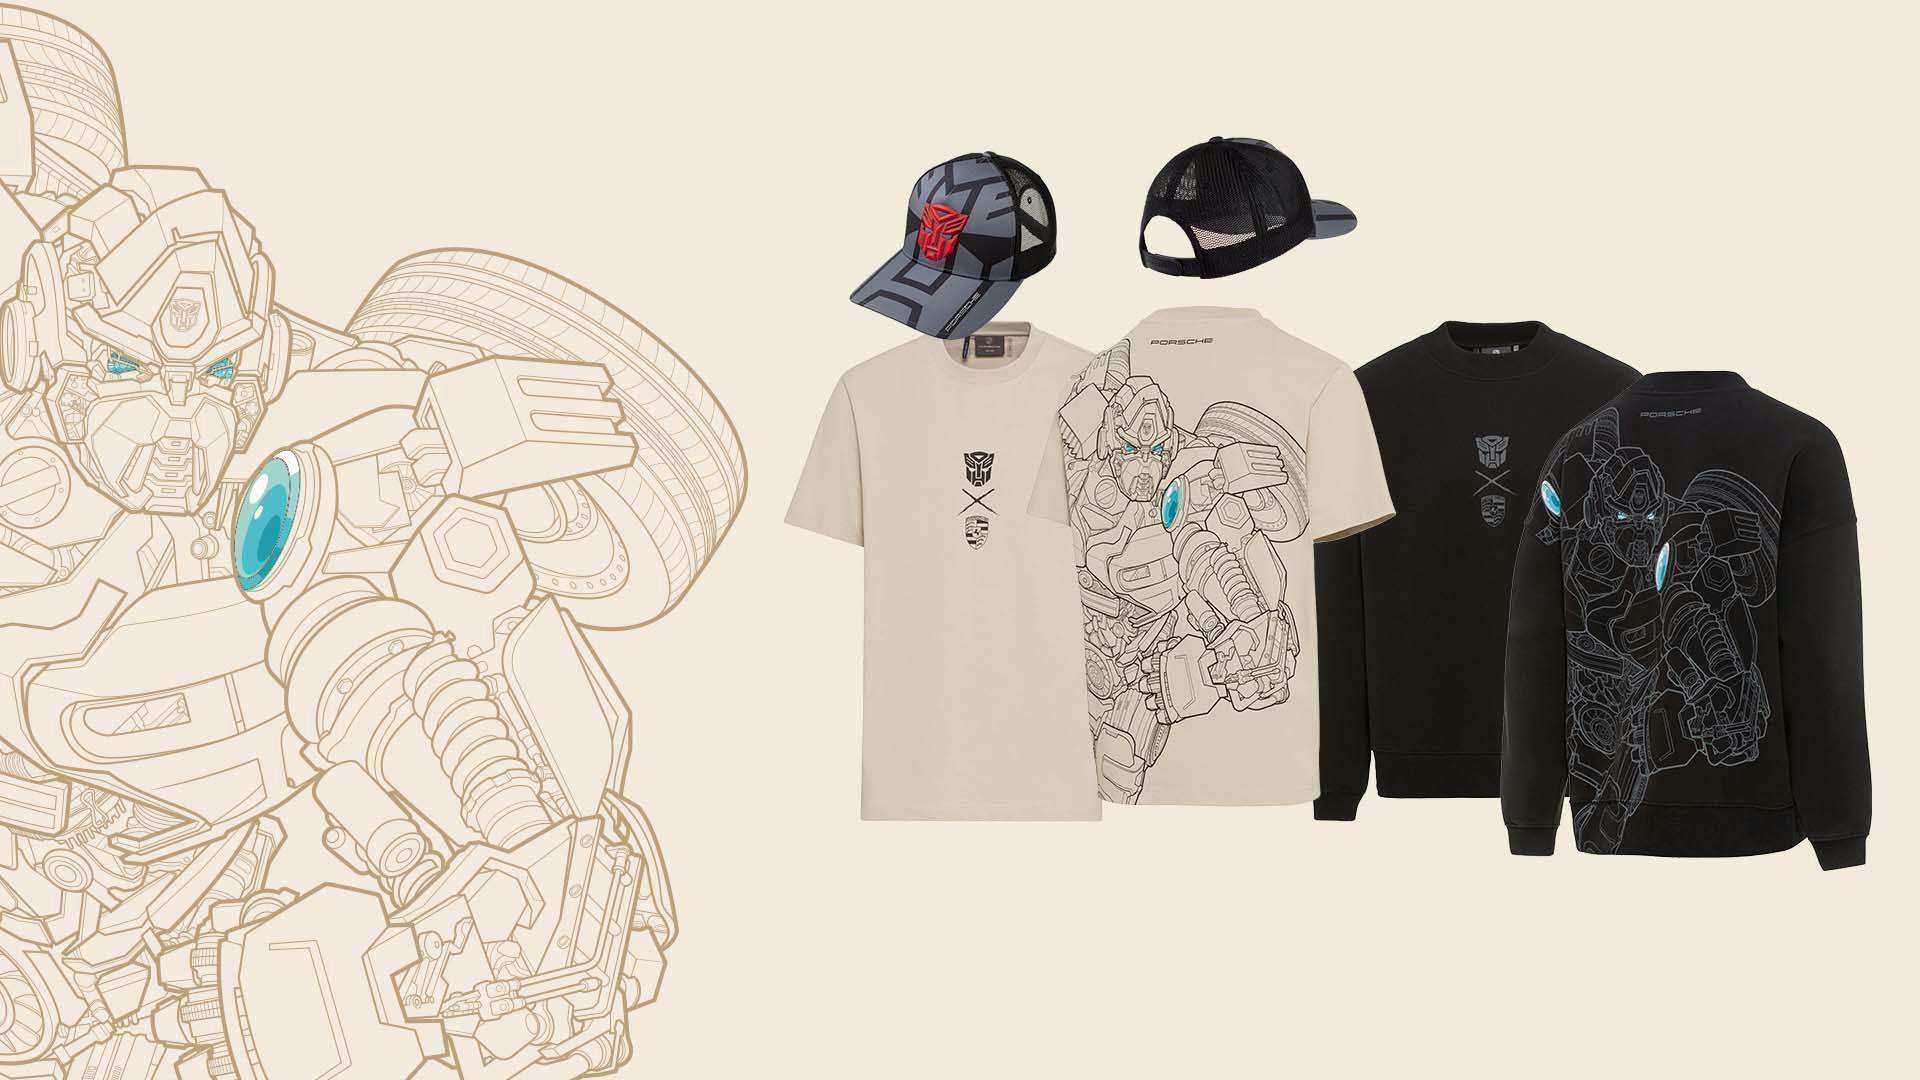 The Transformer Collection with T-Shirts, caps and hoodies